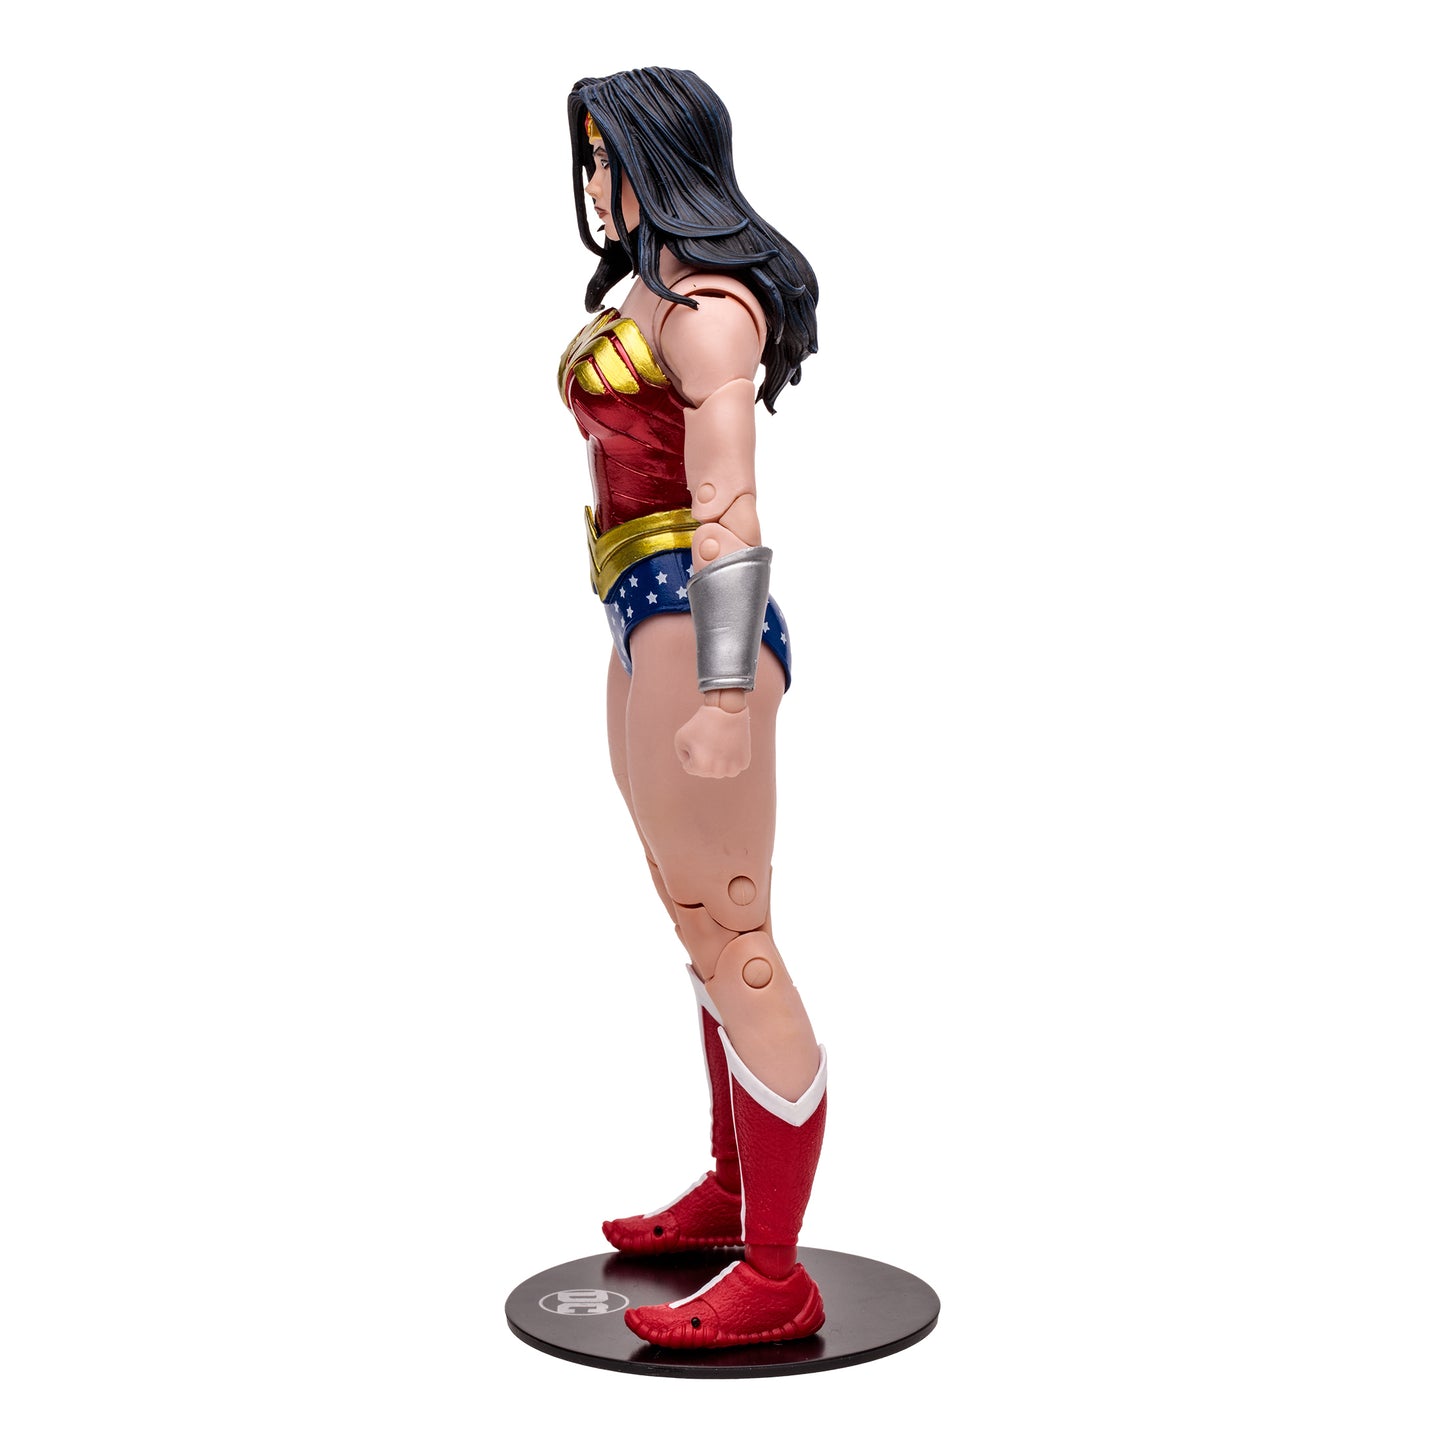 DC McFarlane Collector Edition Classic Wonder Woman 7in Action Figure